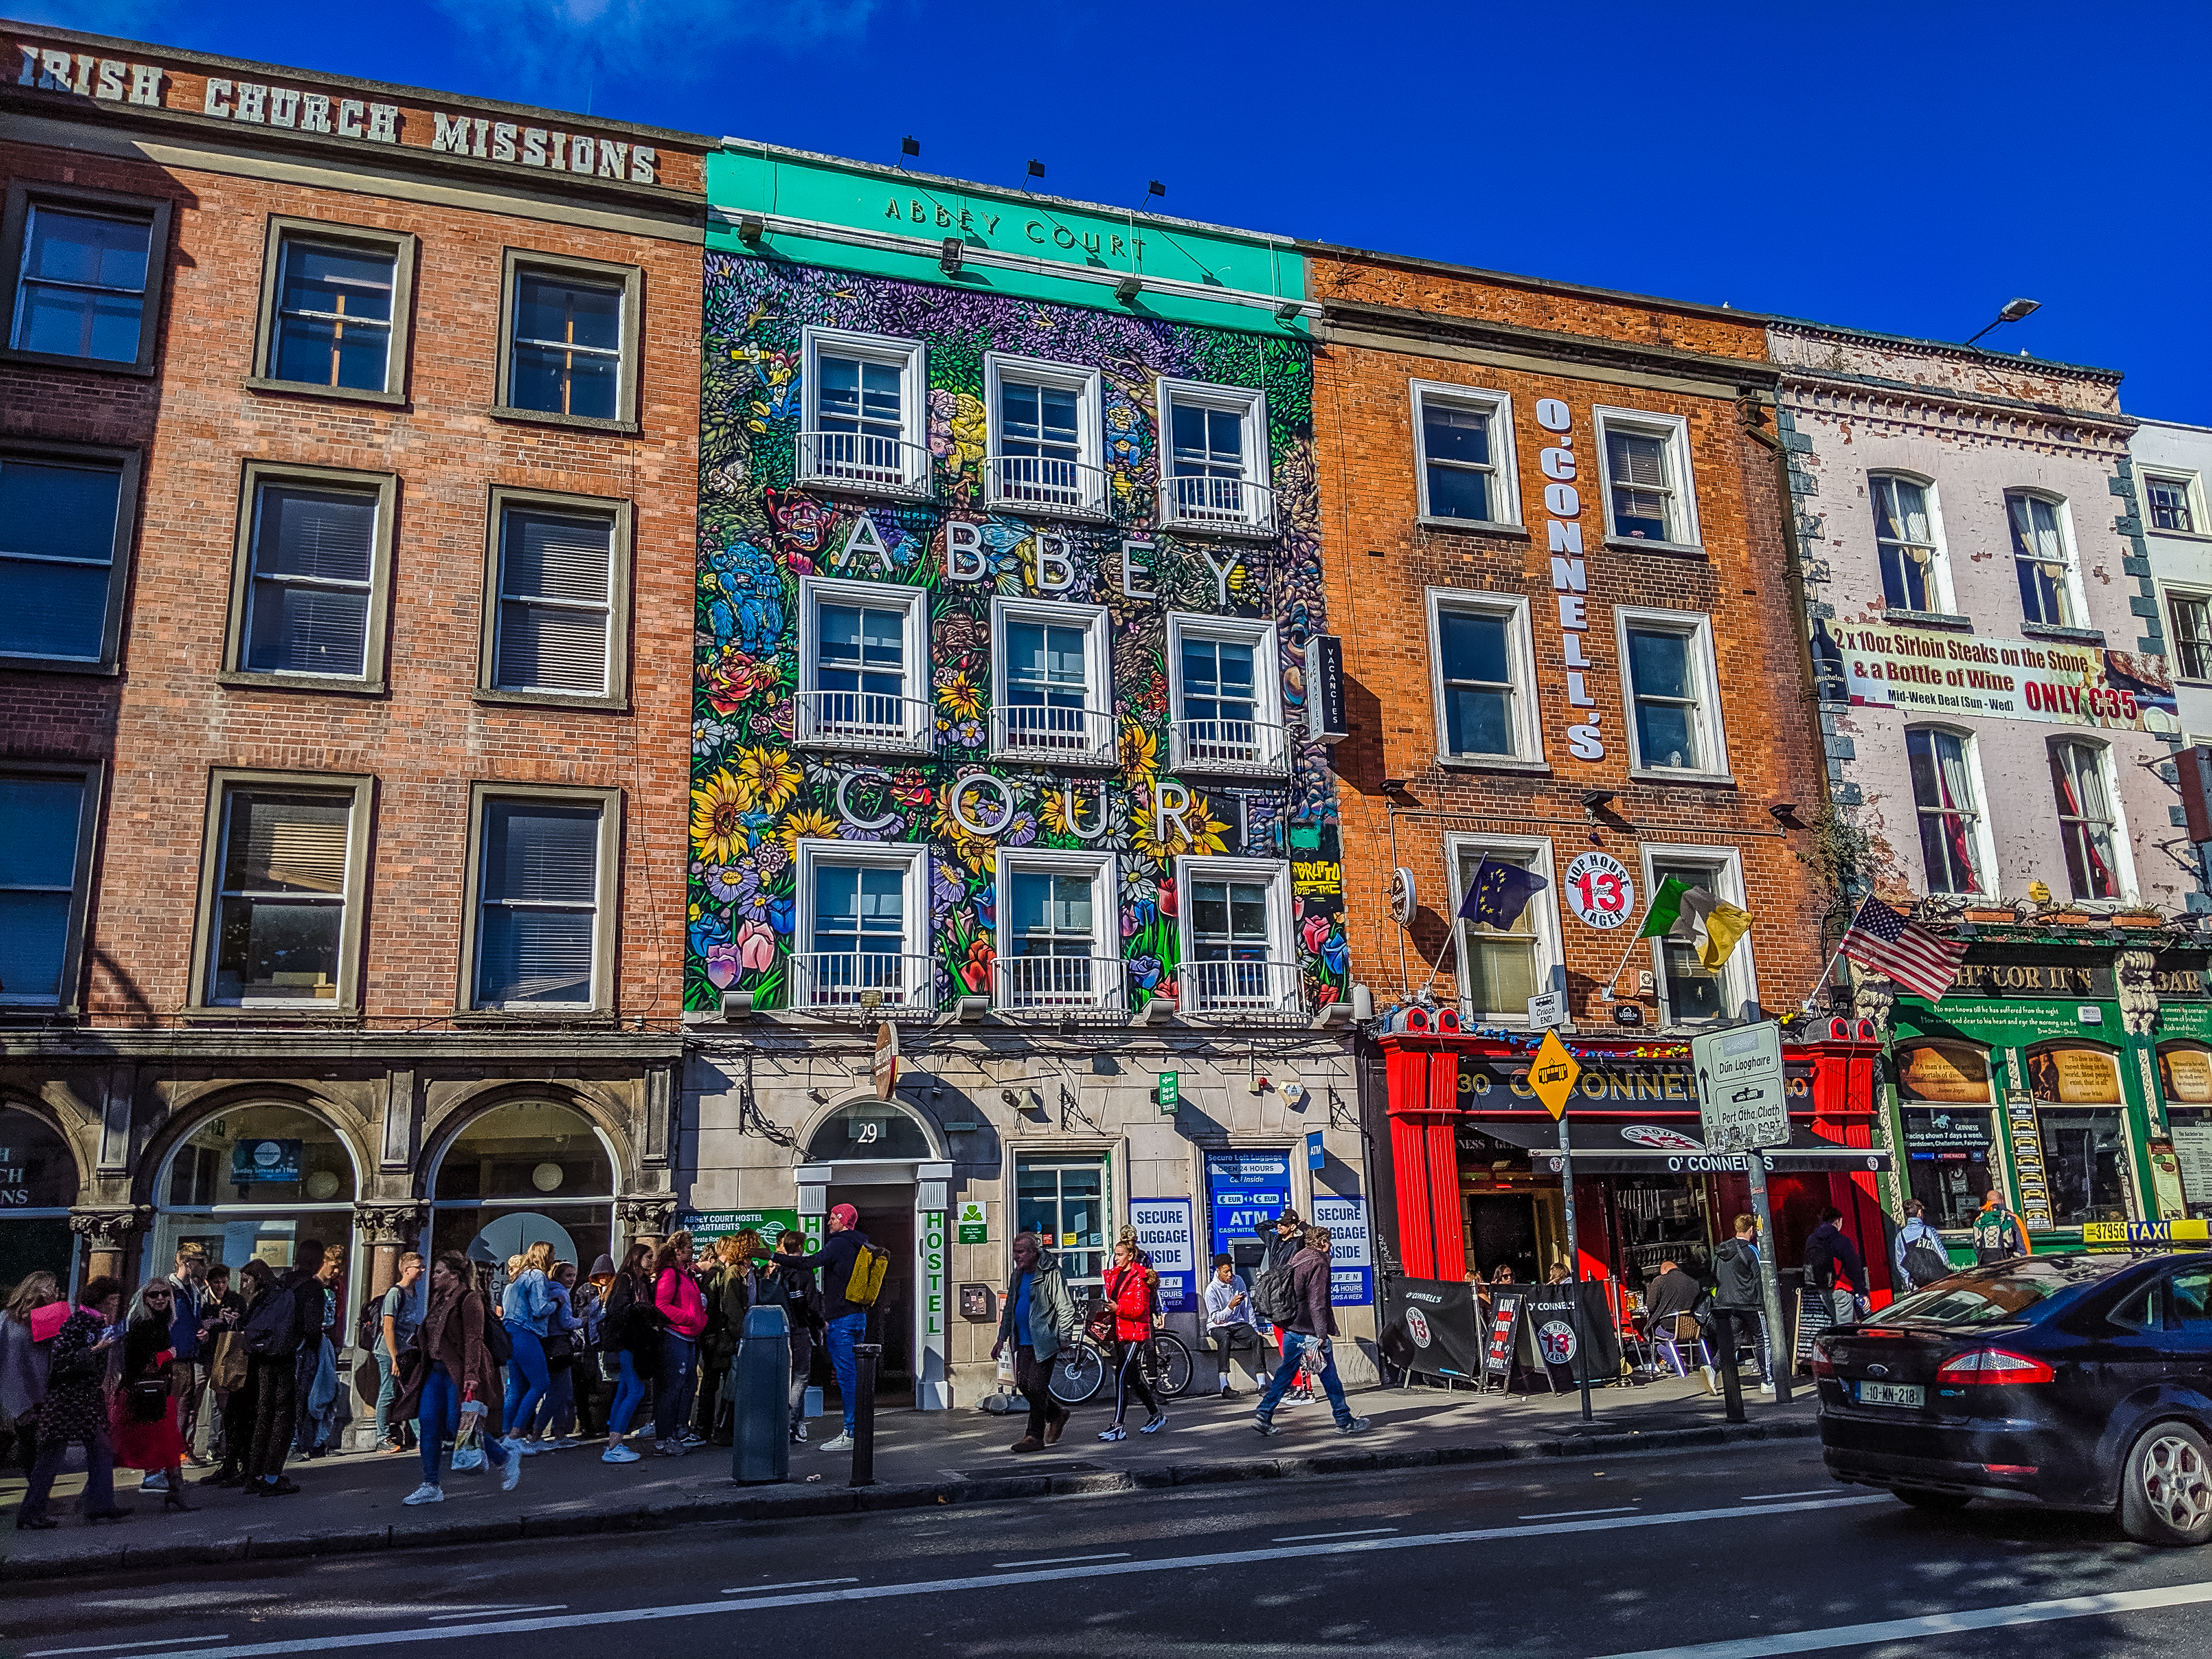 There are many things to do in Dublin, but if you aren’t interested in history, but may feel overwhelmed. Here are 10 things to do in Ireland’s capital that are more than museums.